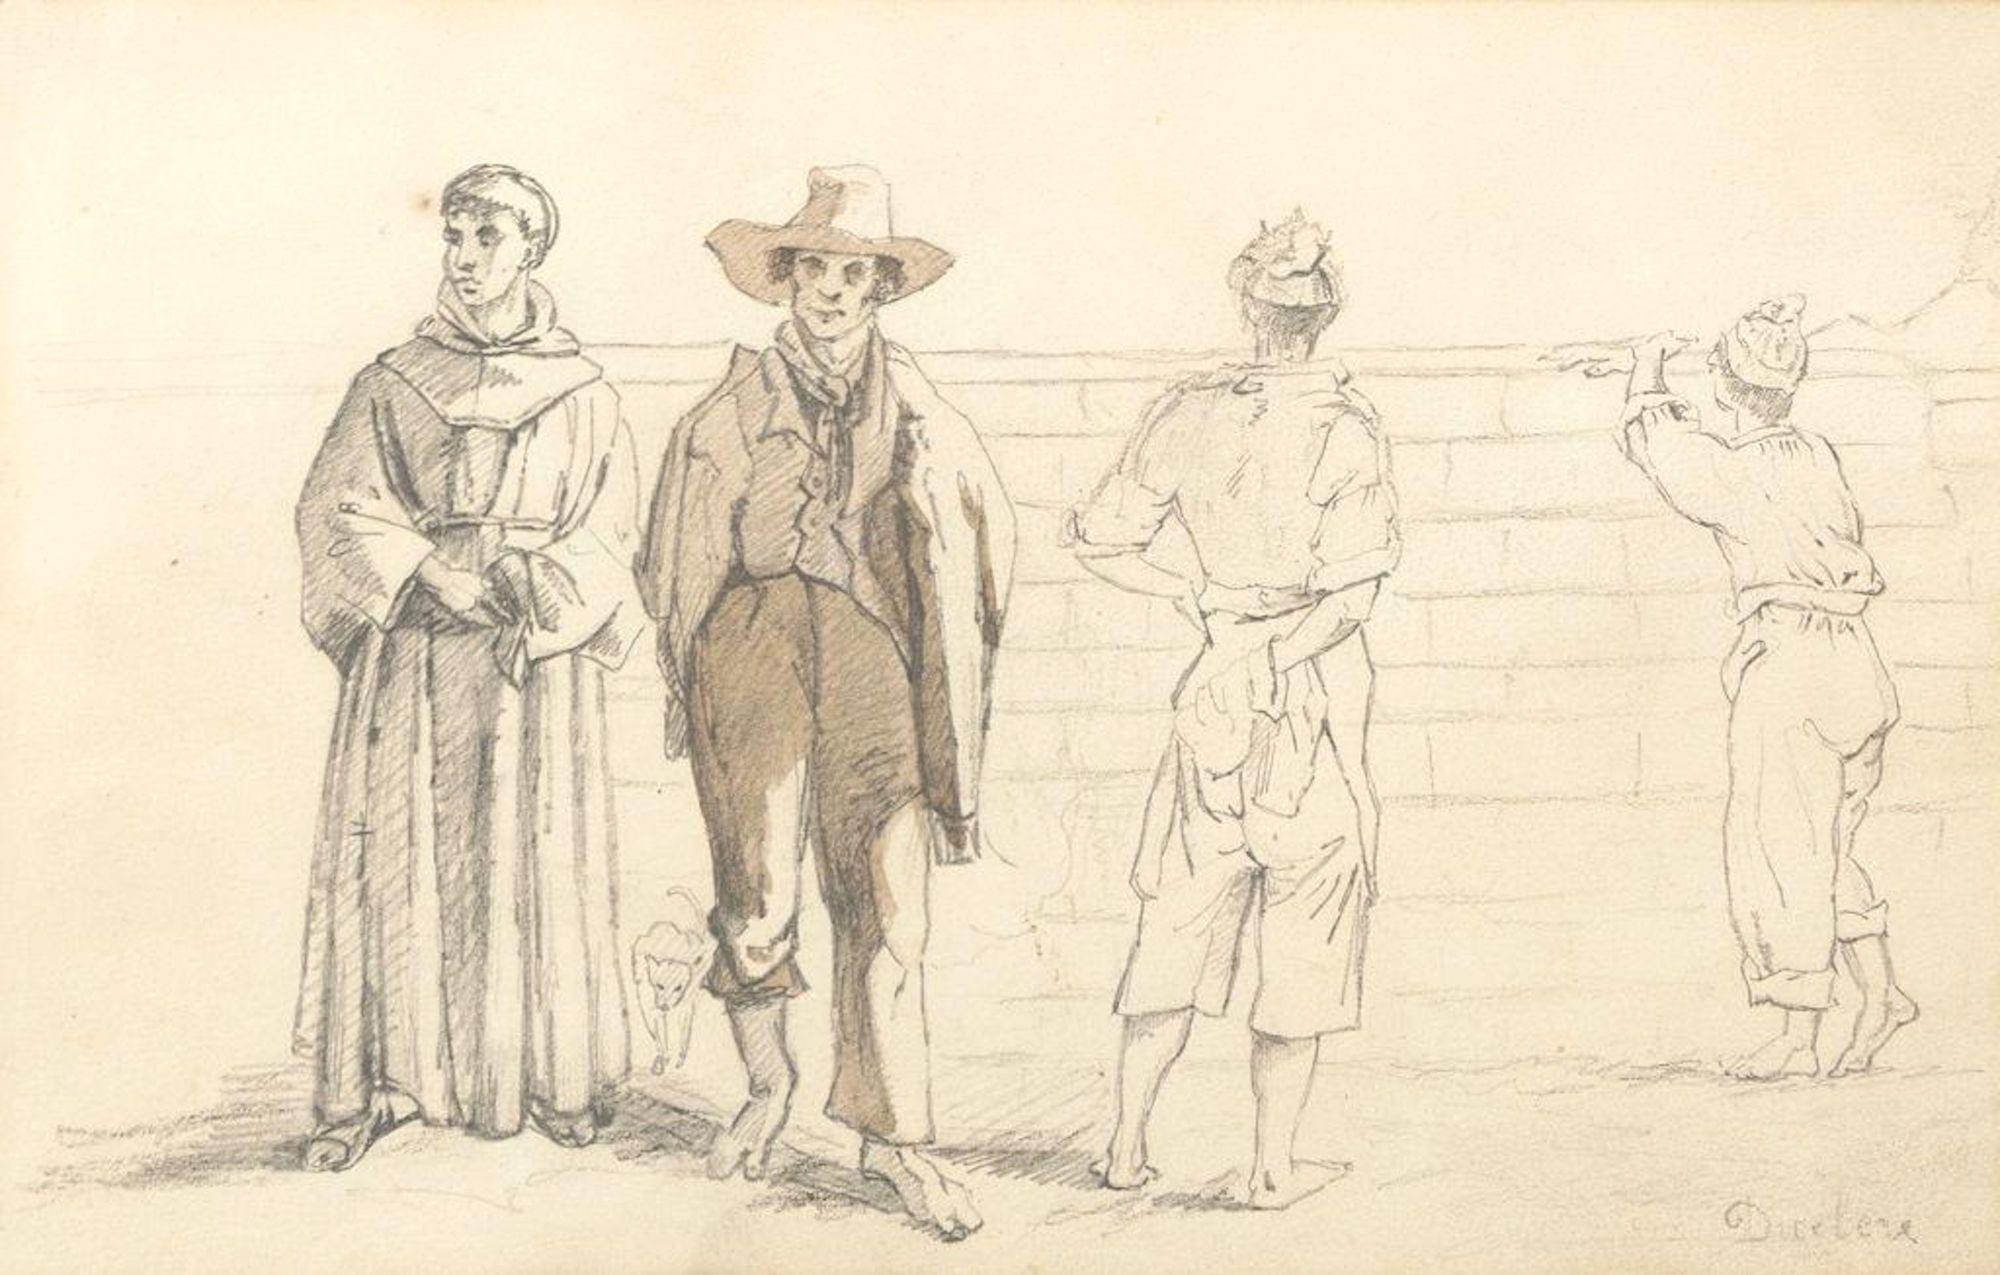 Teodoro Duclère Figurative Art - Commoners and Friars - Pencil Drawing on Paper y T. Duclère - Mid 1800